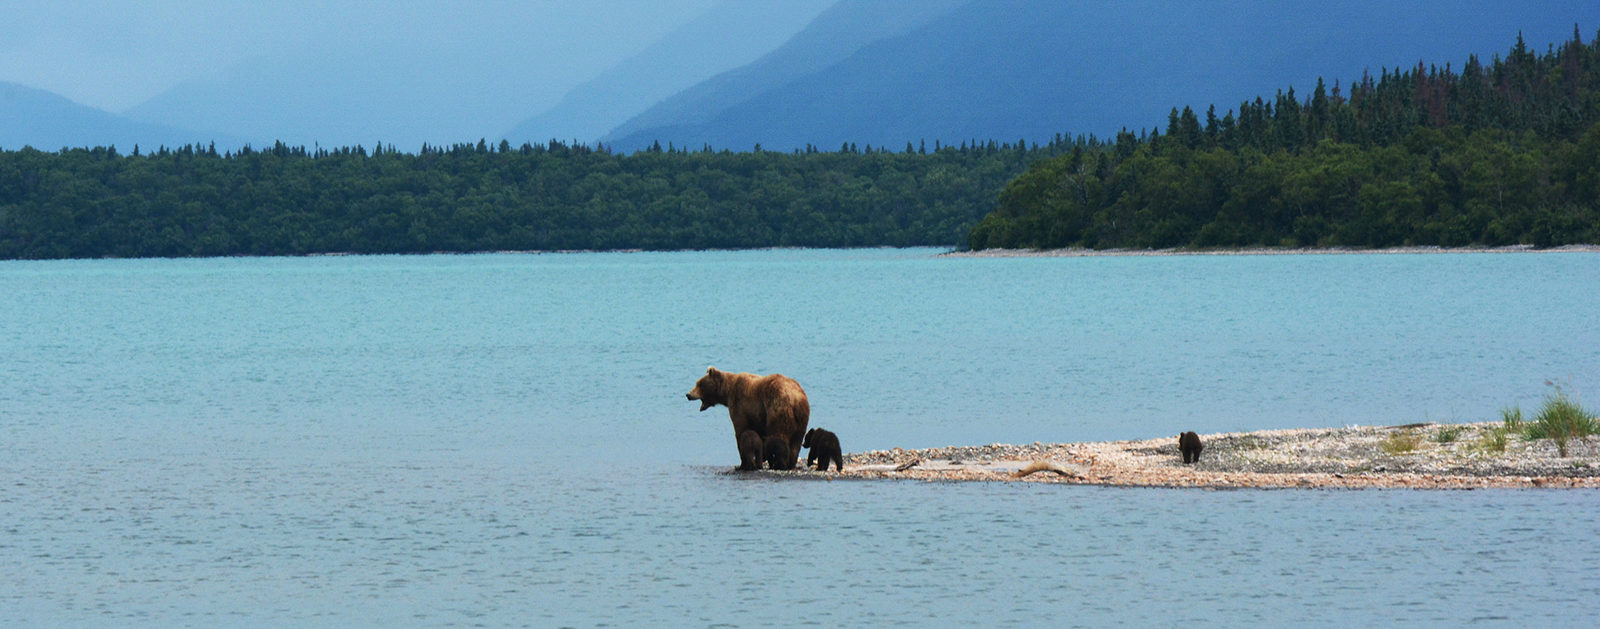 Grizzly bears on Naknek Lake in Katmai National Park. | Photo: Paxzon Woelber, Cinders to Sea Expedition